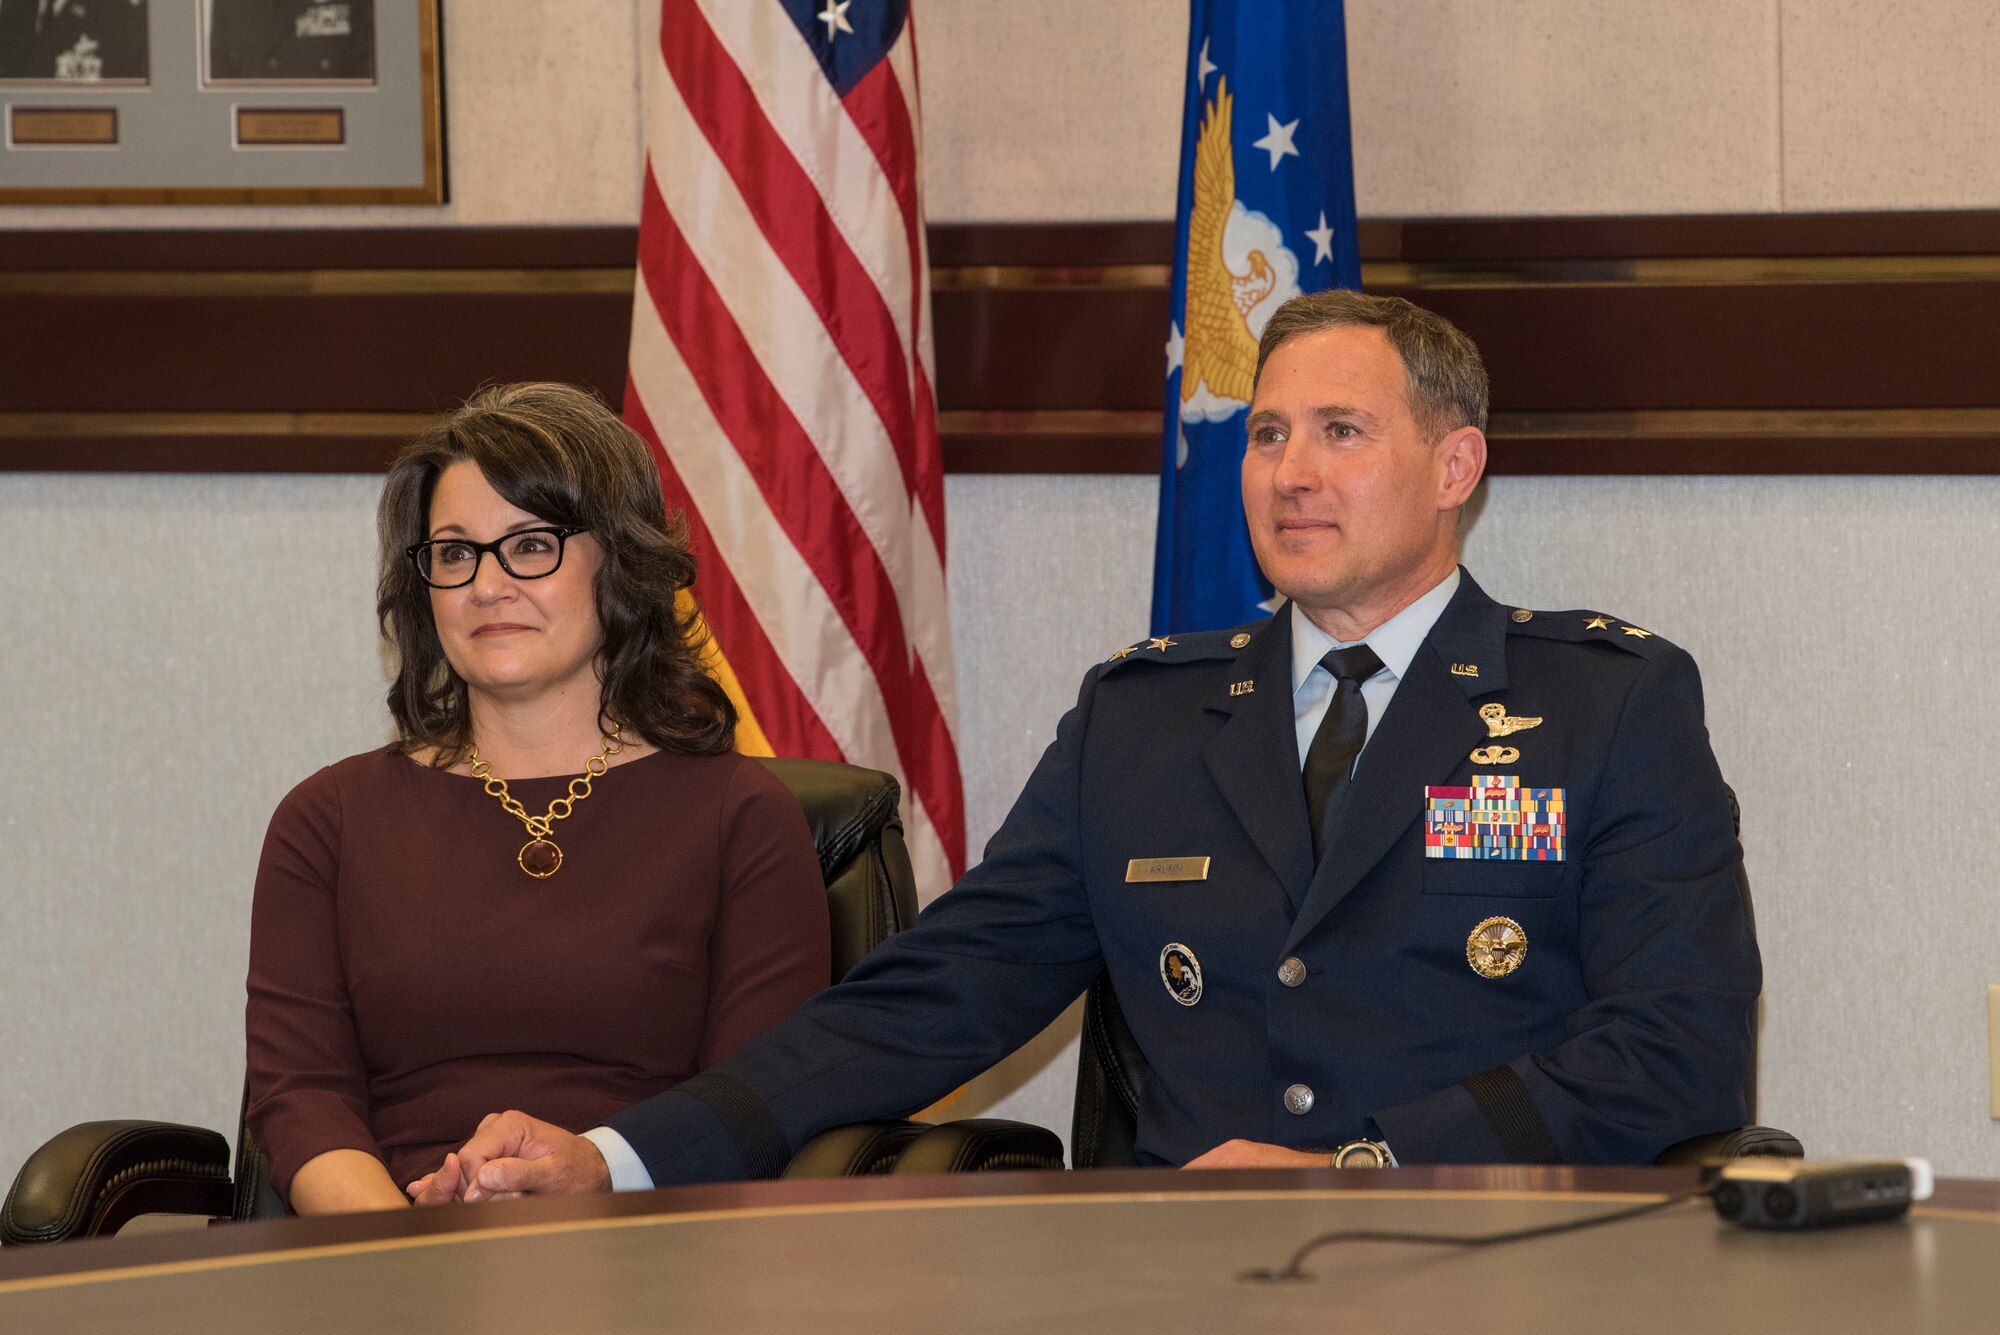 U.S. Air Force Lt. Gen. David A. Krumm sits by his wife, Lisa, during his promotion ceremony April 20, 2020, at Joint Base Elmendorf-Richardson, Alaska. Krumm’s promotion places him as the senior military officer in Alaska, responsible for the integration of all military activities in the Alaskan joint operations area, synchronizing mission operations for more than 21,000 active-duty and reserve forces from all services.